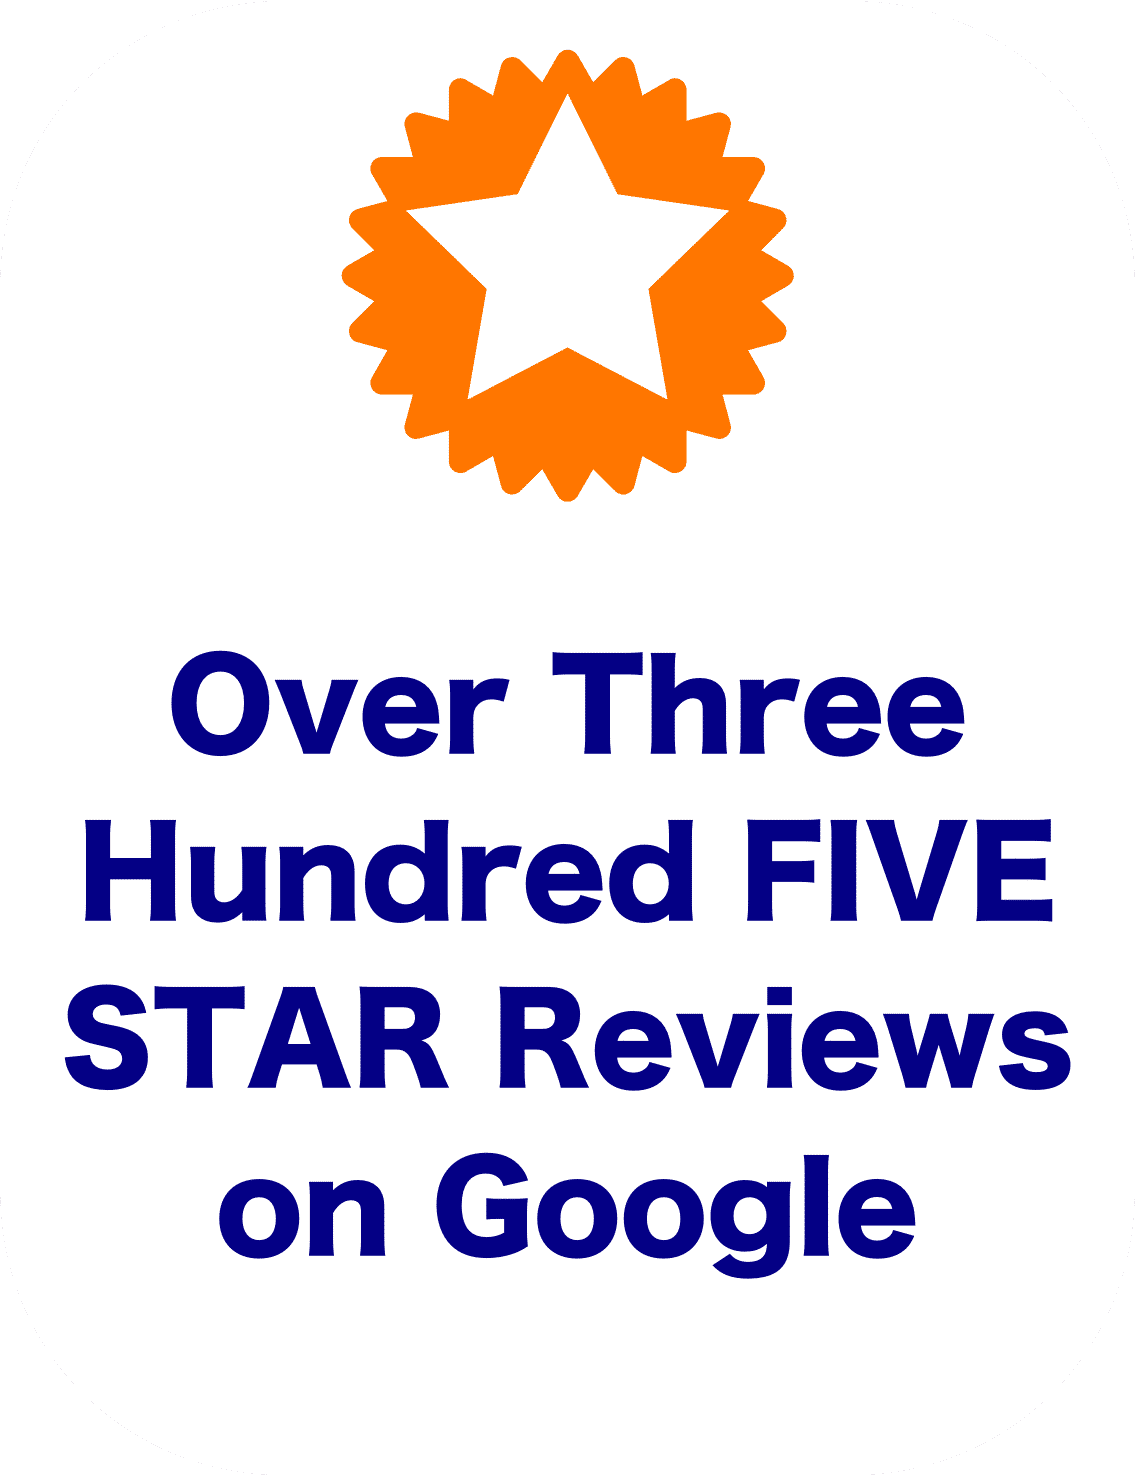 Over Three Hundred Five Star Reviews on Google